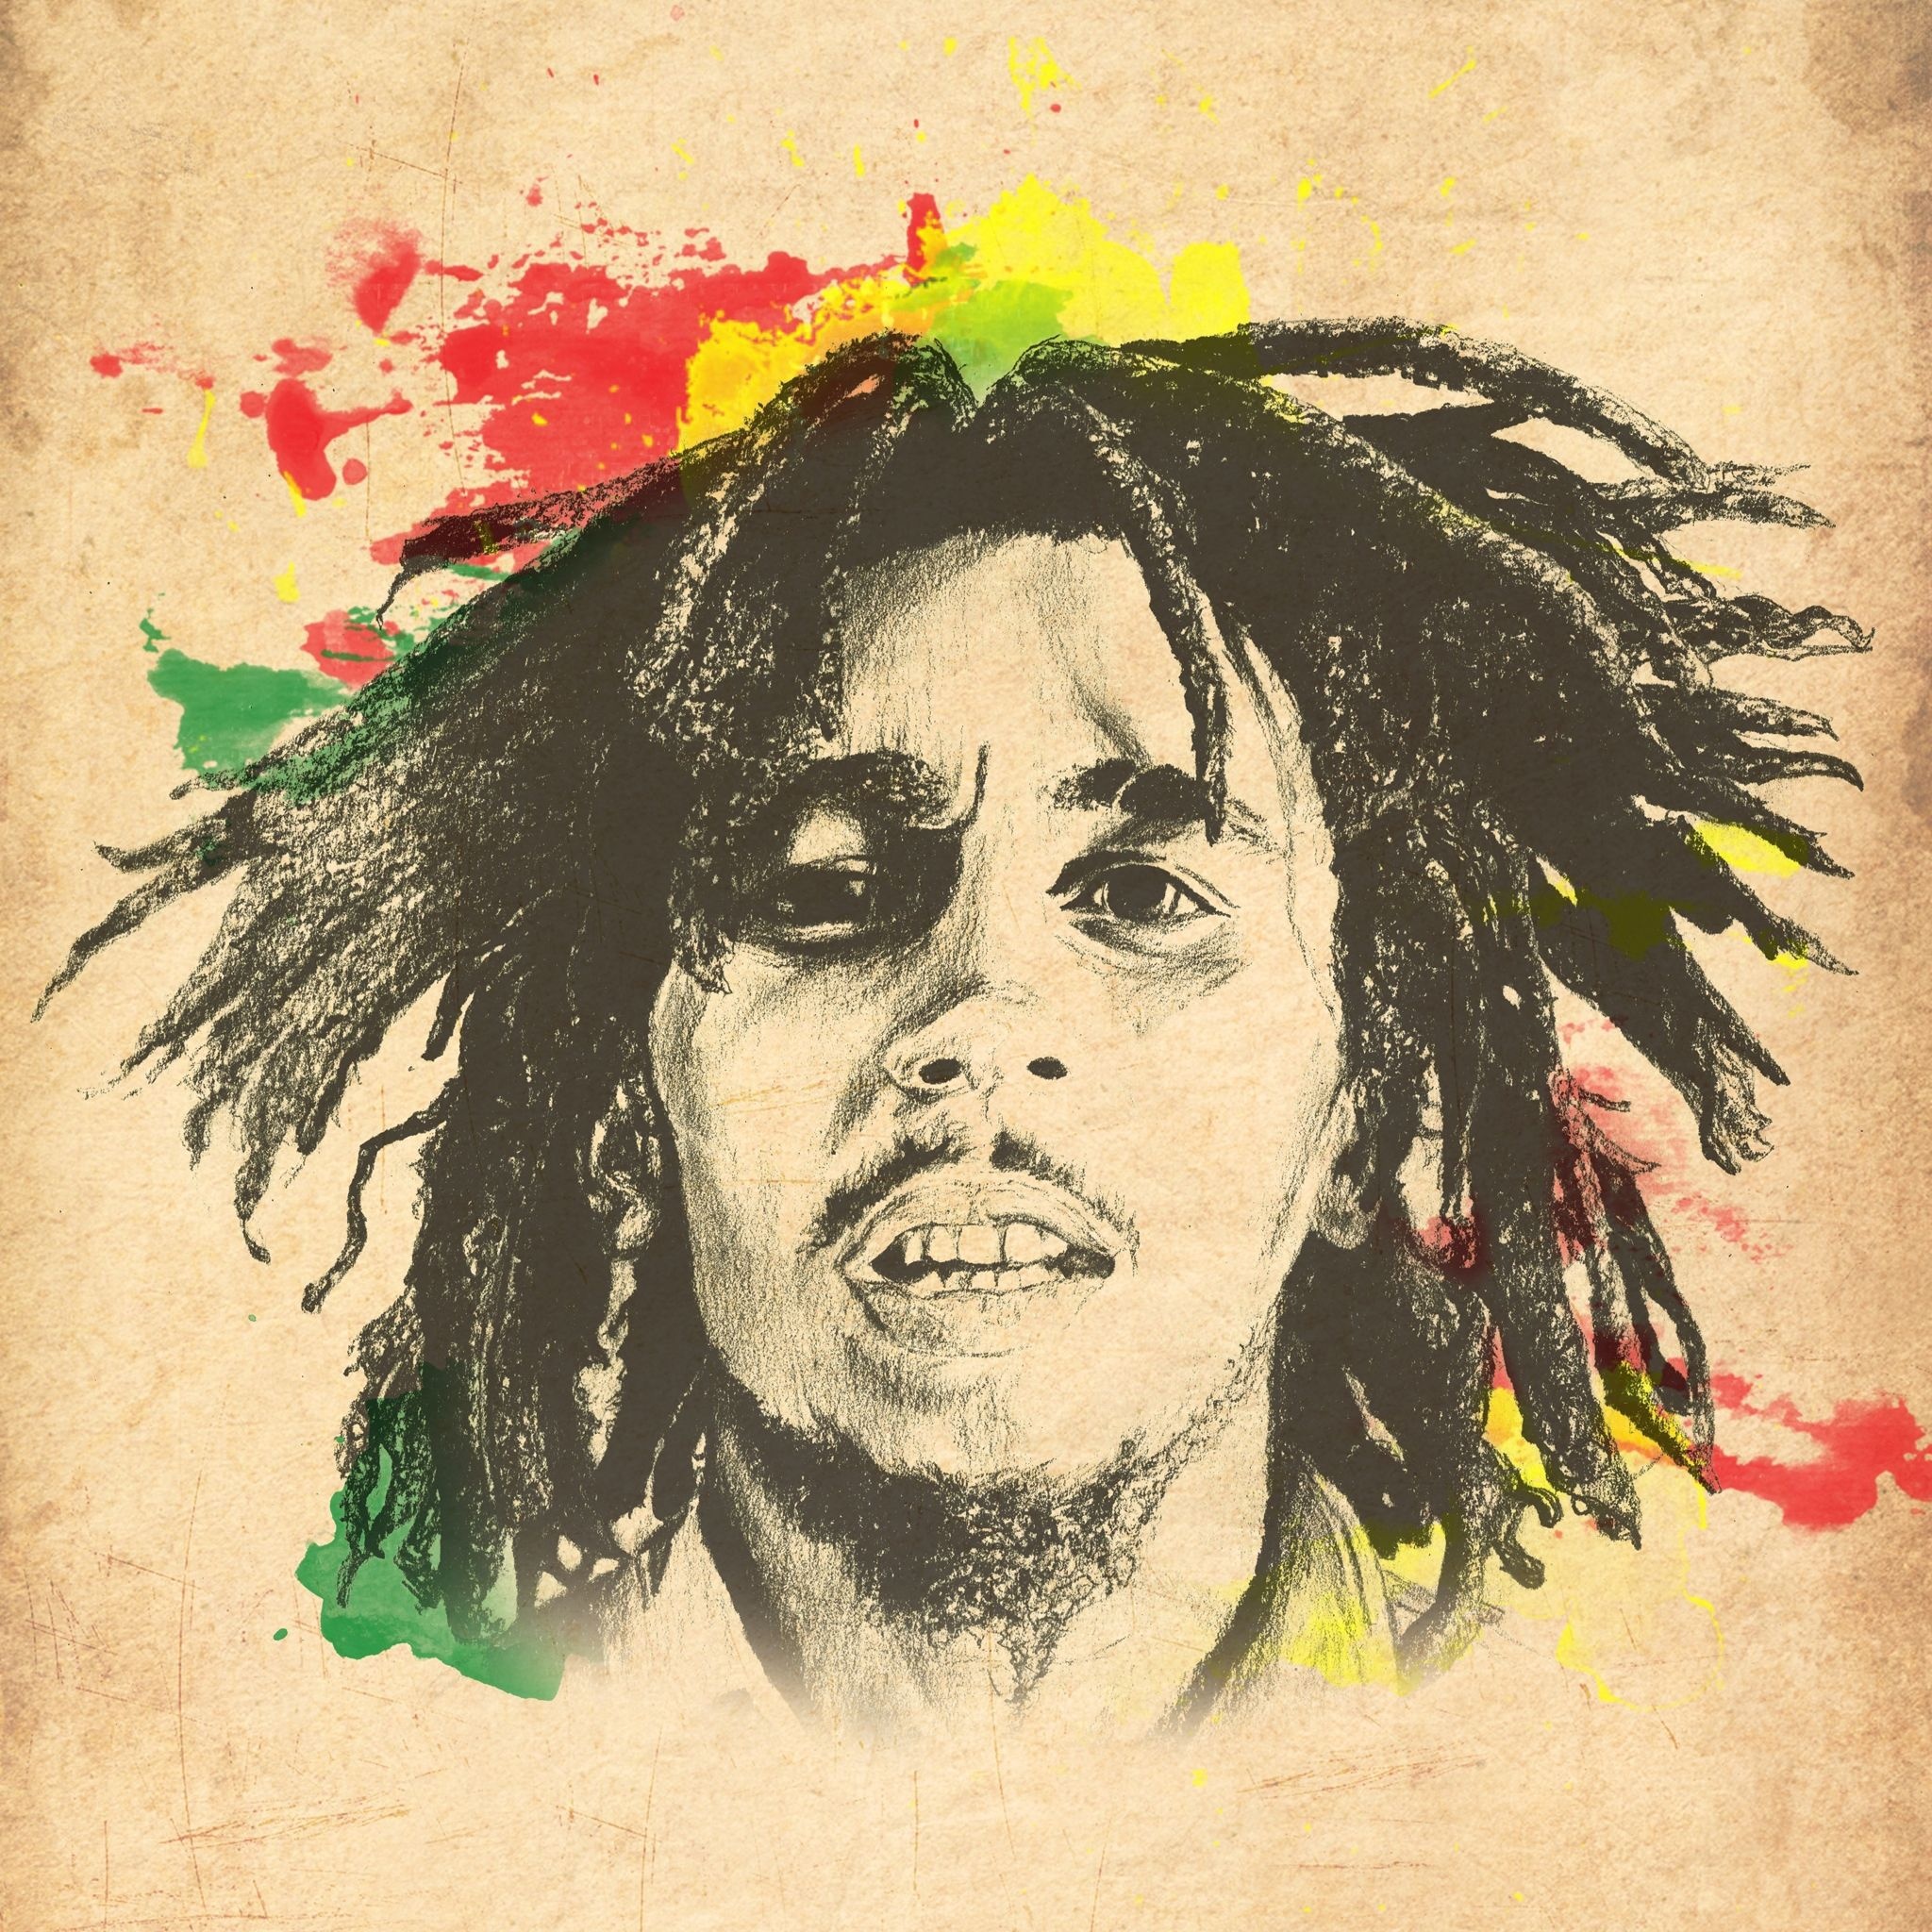 Bob Marley: One of the best-selling music artists of all time, with estimated sales of more than 75 million records worldwide. 2050x2050 HD Wallpaper.